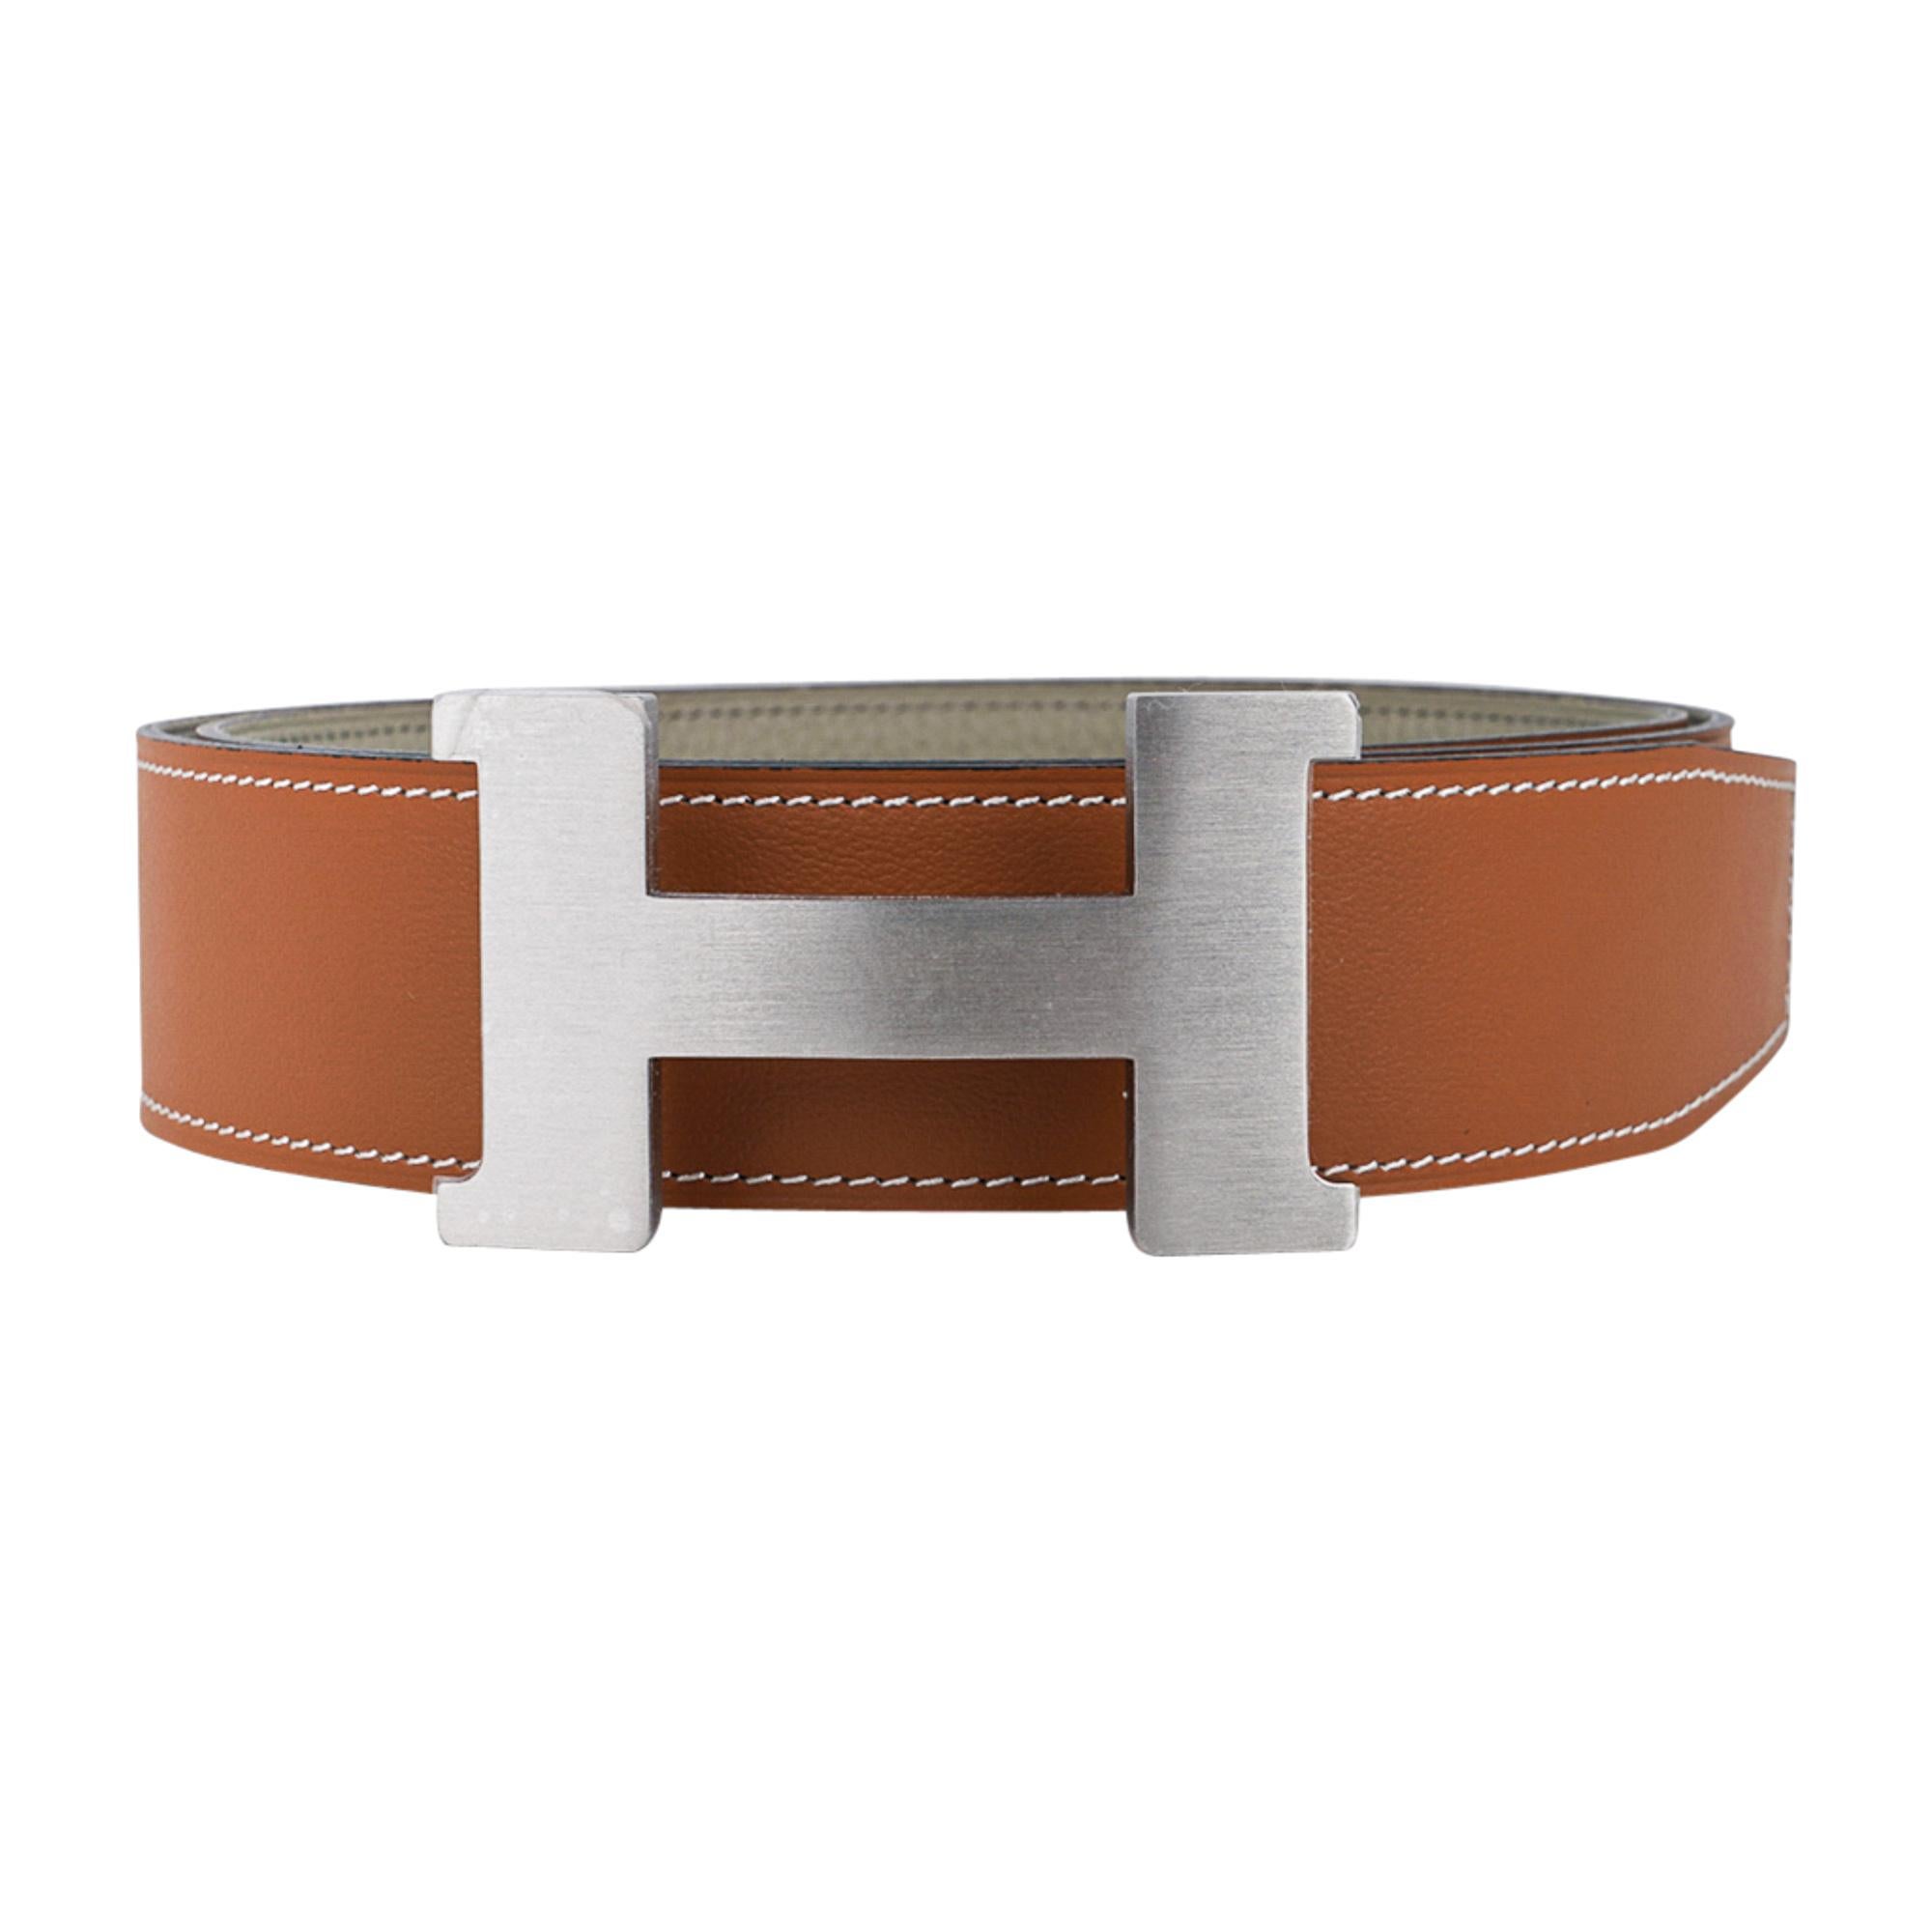 Mightychic offers an Hermes coveted reversible 38mm Constance H belt featured in Sage and Gold.
Beautiful with brushed Palladium buckle.
In Togo (Sage) and Evercolor (Gold) leather.
These beautiful colors are a rare combination!
Signature HERMES